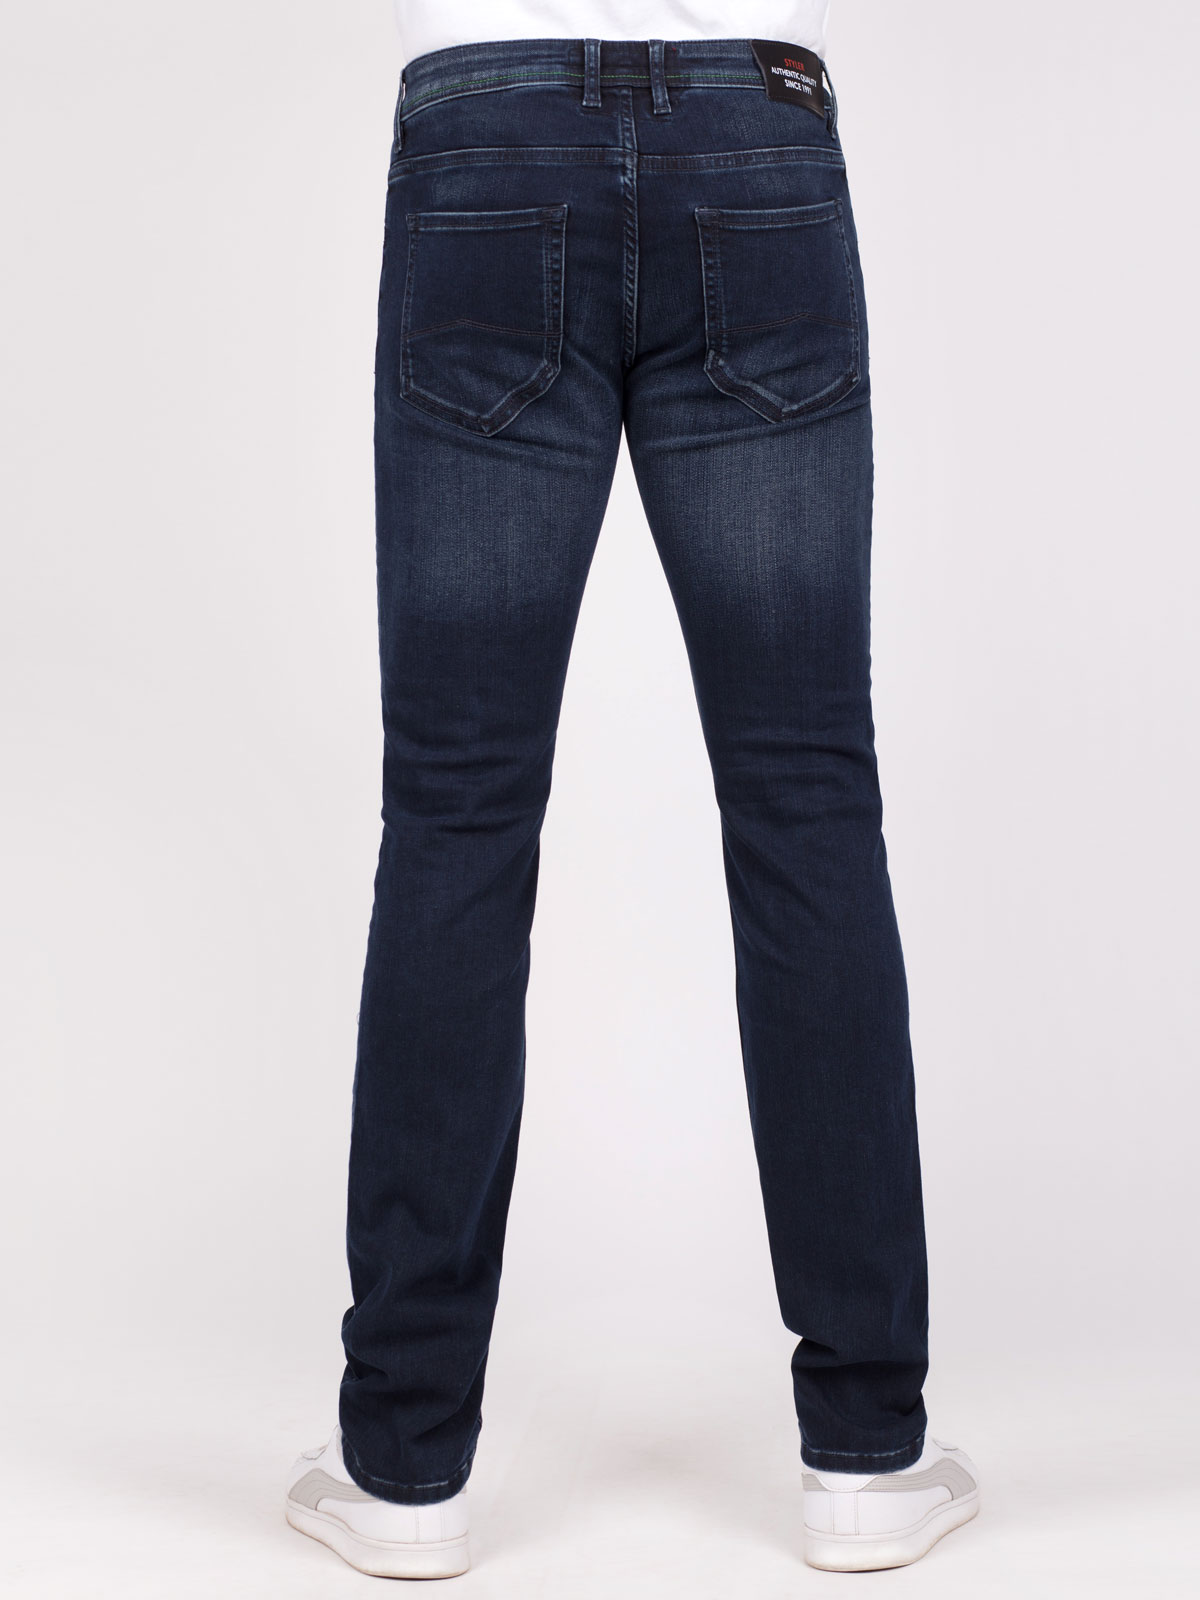 Jeans in indigo with green crucible - 62158 € 78.18 img3